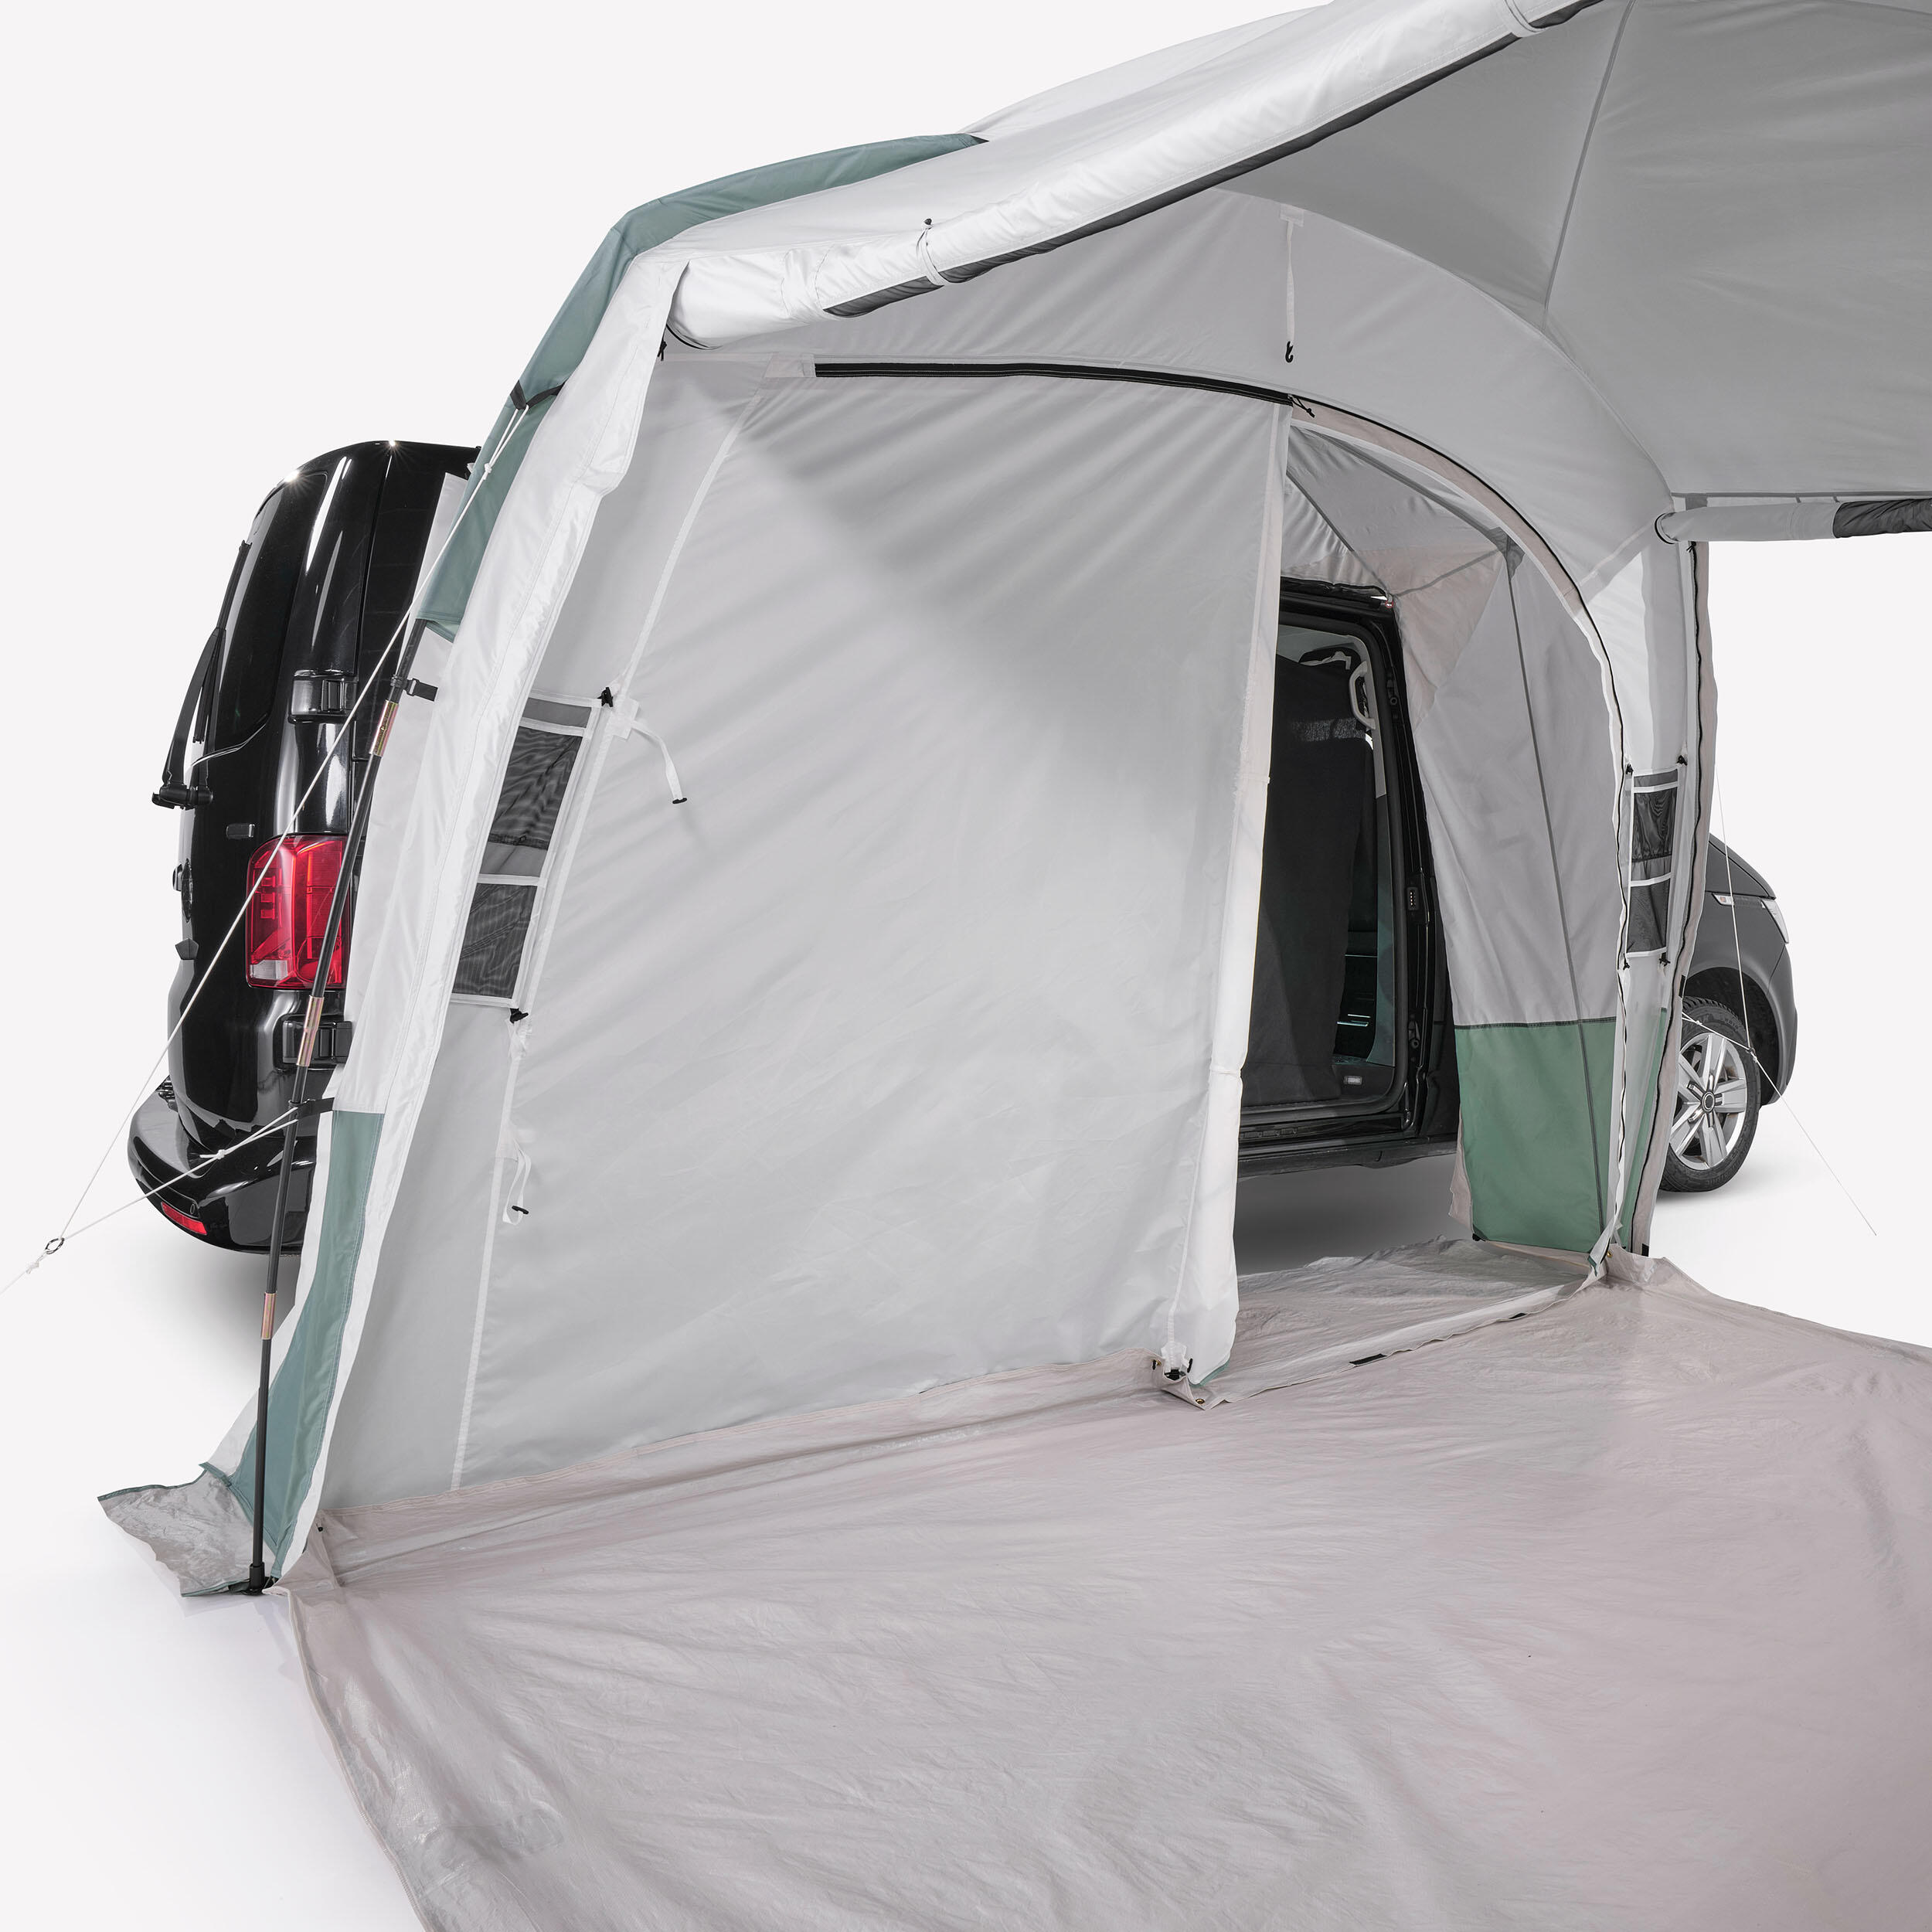 Pole awning for vans and trucks - Van Connect Arpenaz Fresh - 6 people 11/16